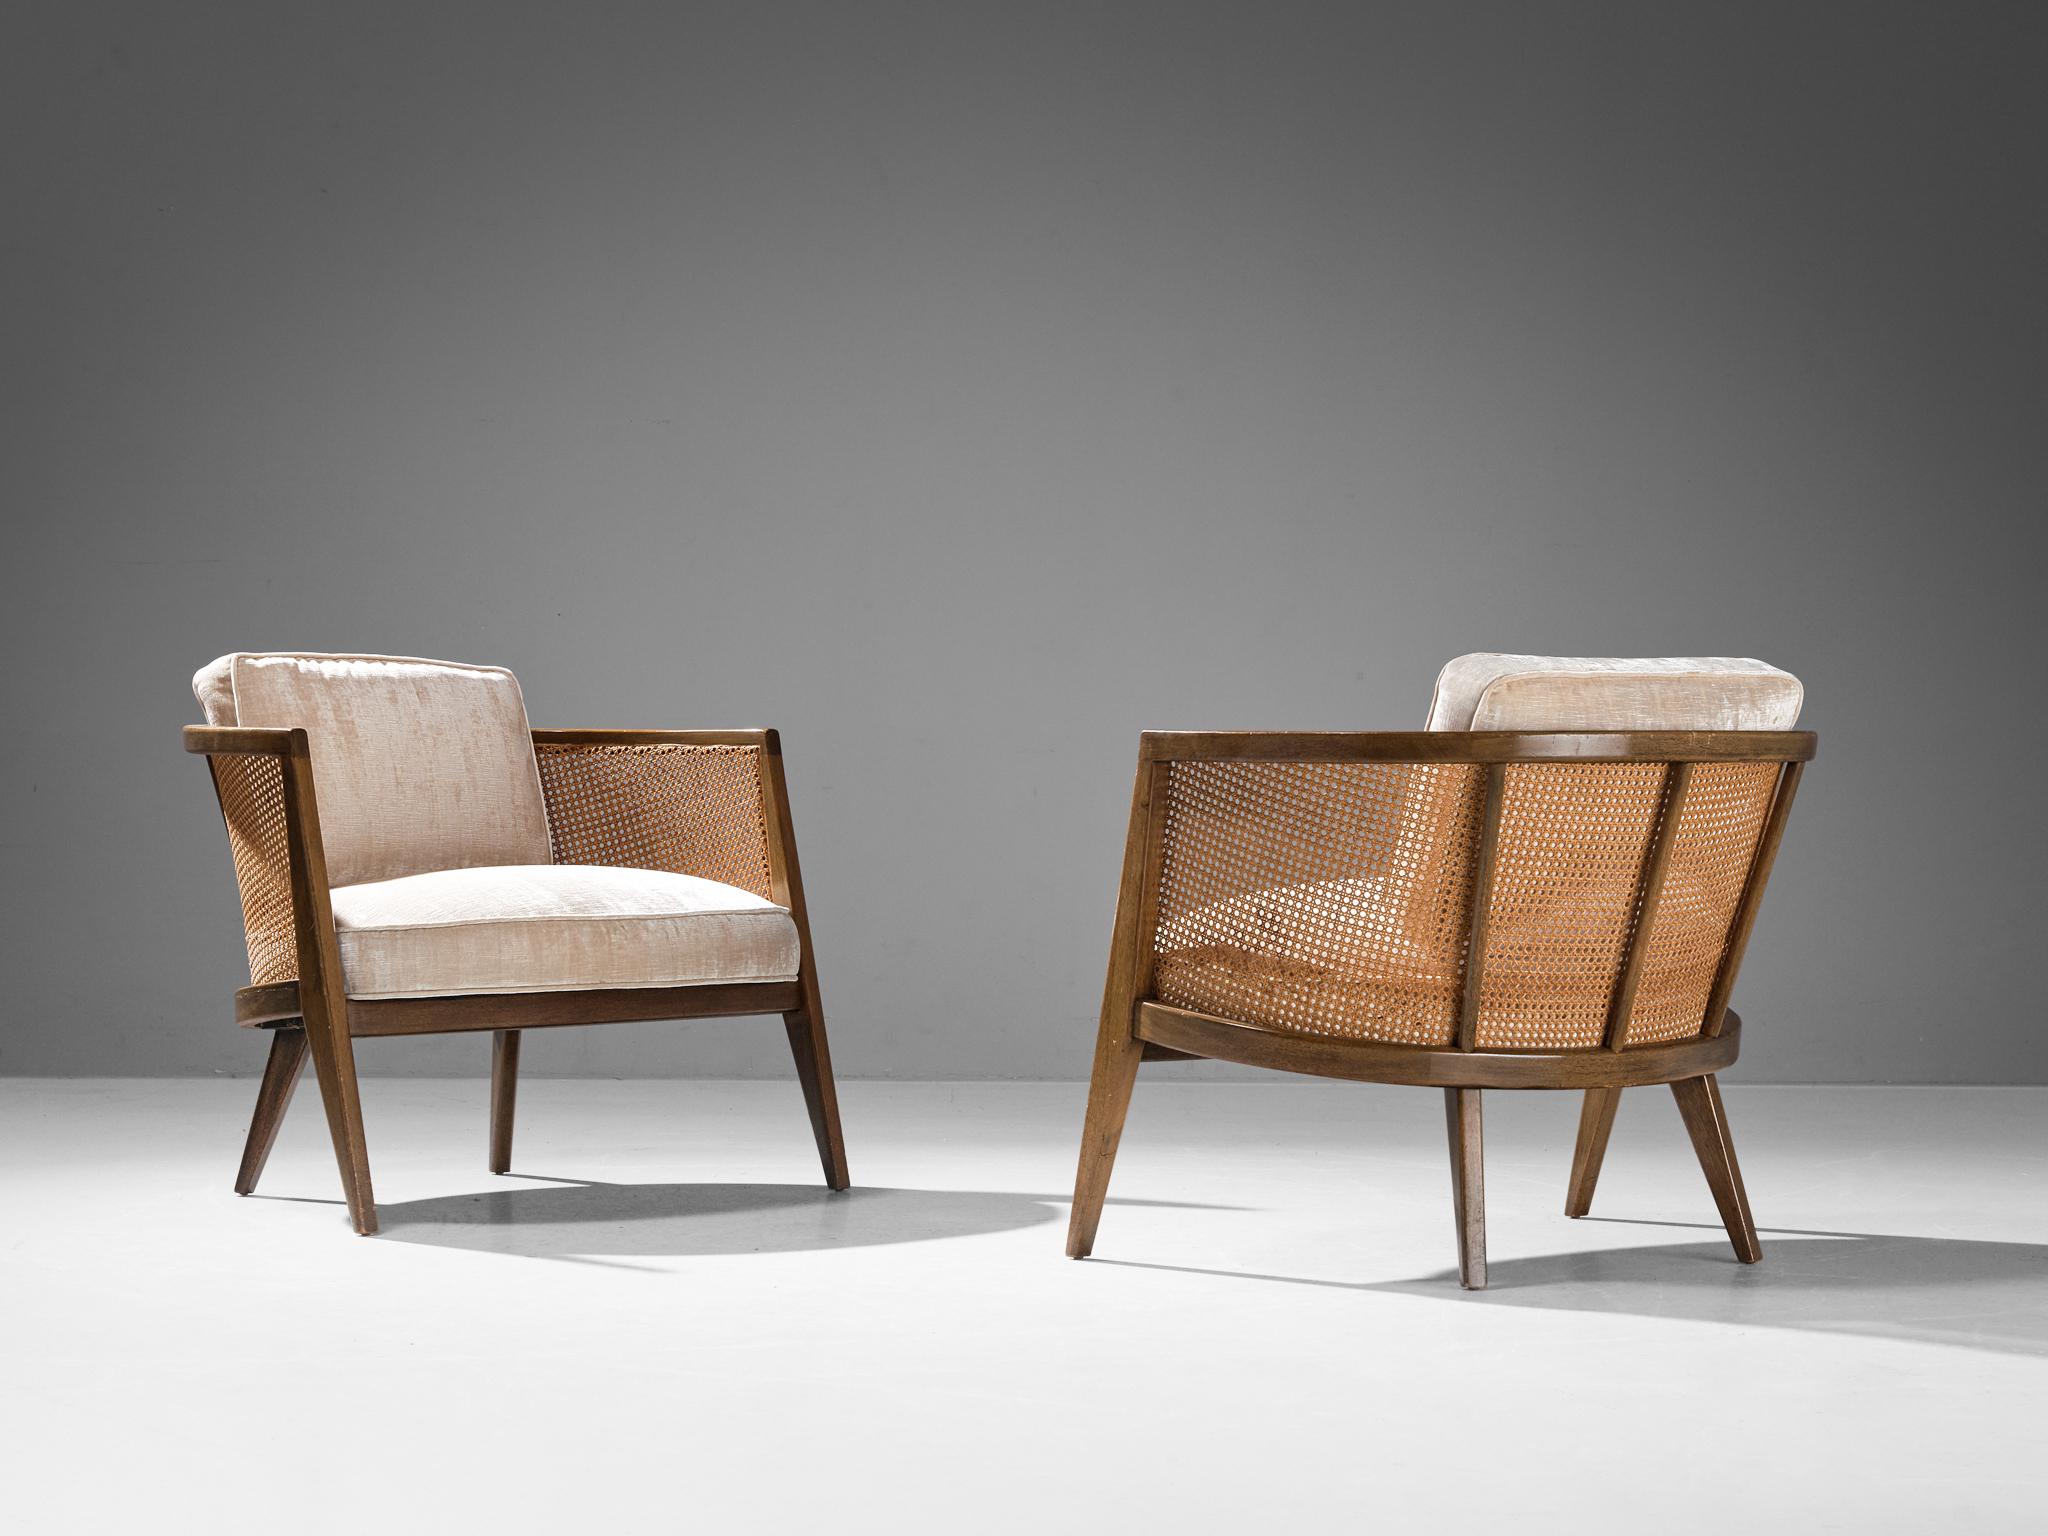 Harvey Probber, pair of 'Oval' easy chairs, model '1066', mahogany, cane, off-white velvet, United States, 1950s 

This pair of lounge chairs is conceived by American designer Harvey Probber around the fifties. The defining element of these chairs